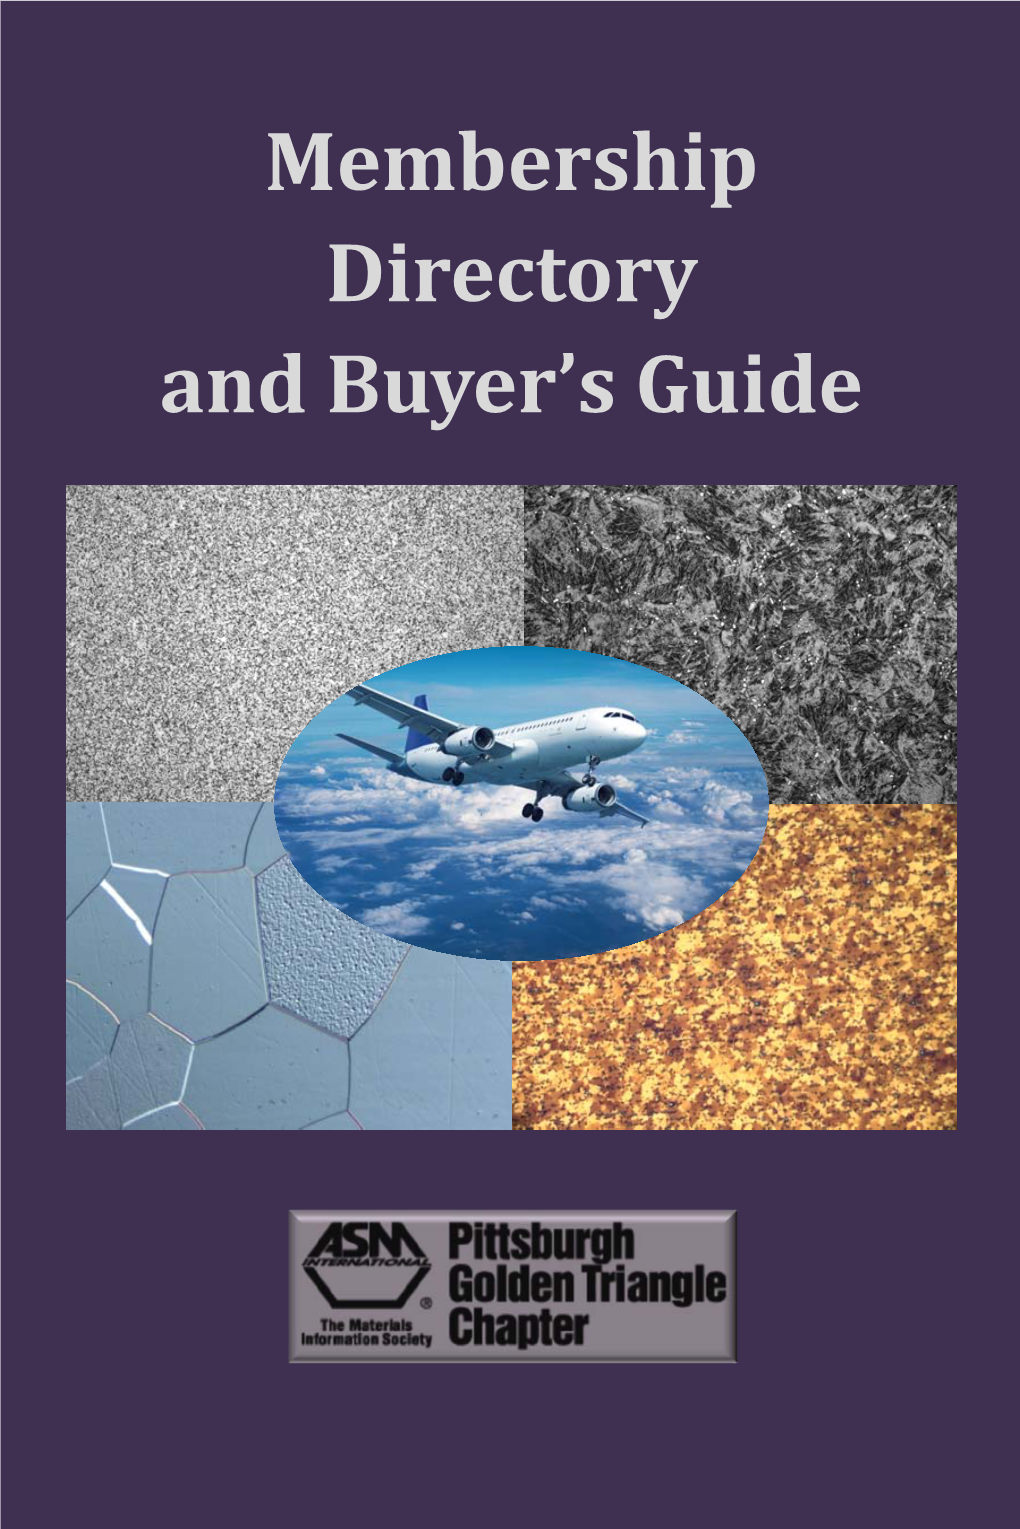 Membership Directory and Buyer's Guide